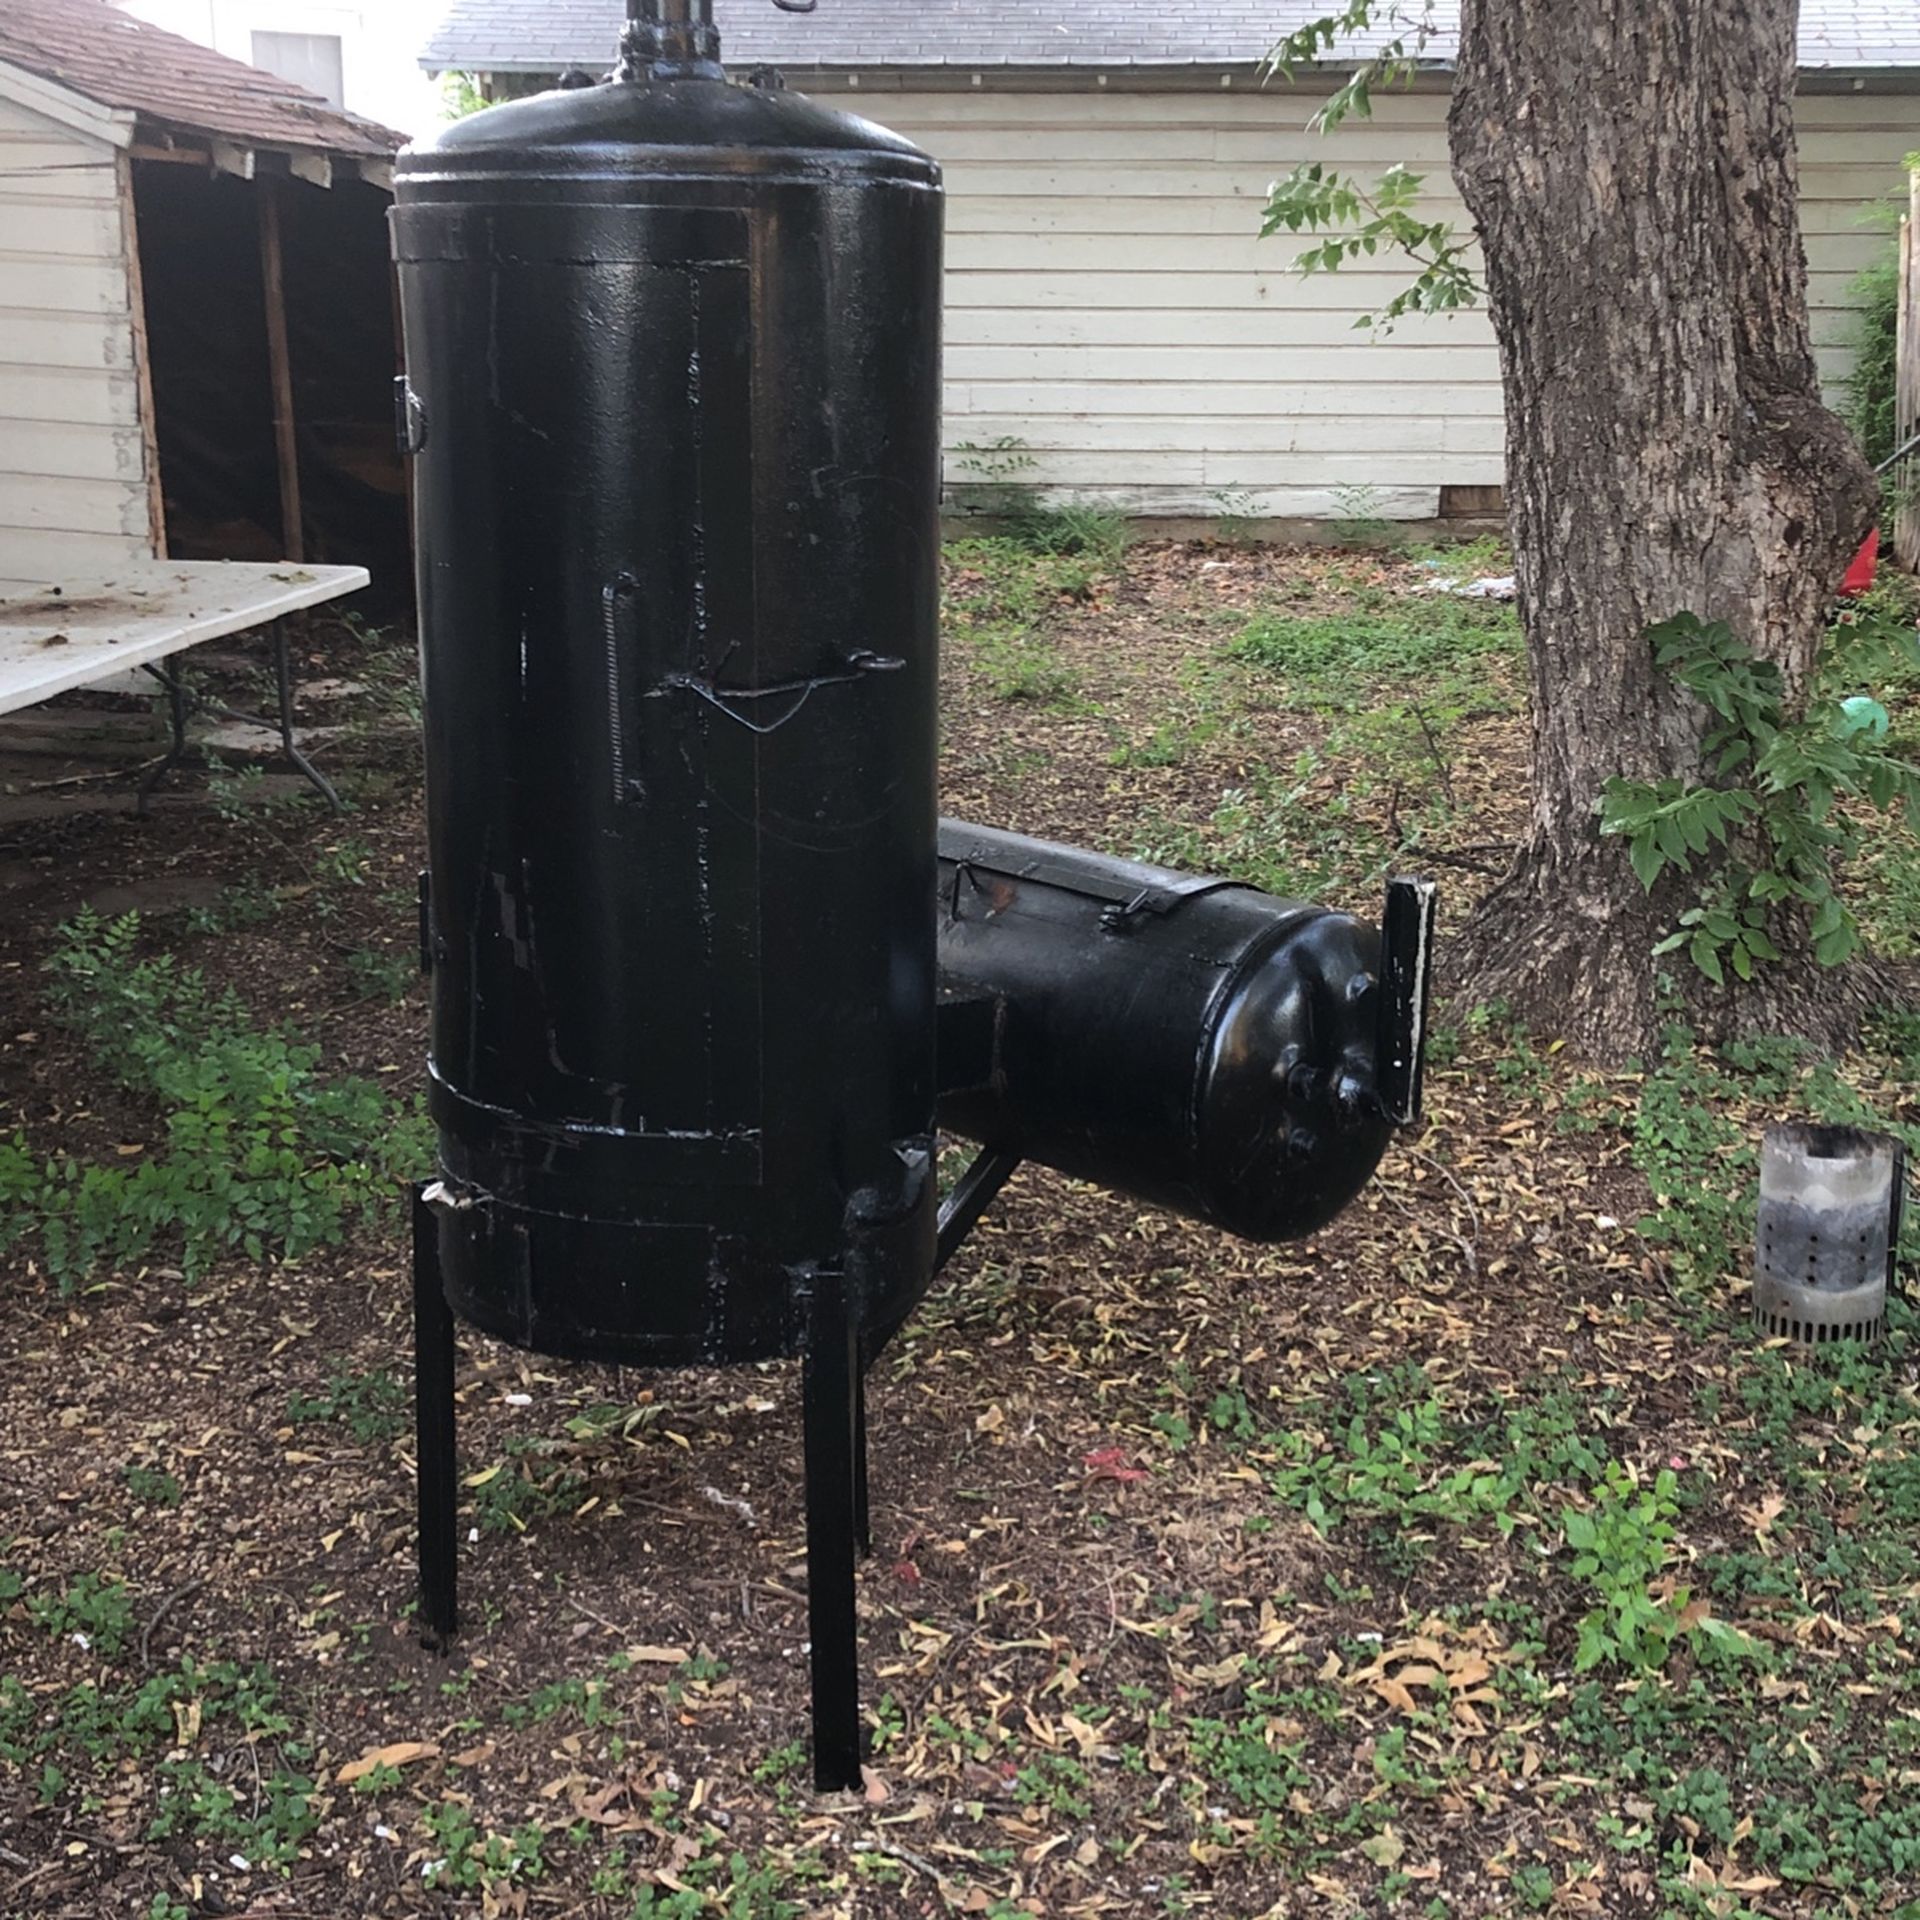 Home Made Bbq Grill And Smoker It Has Propane burner within the smoke Barrel also